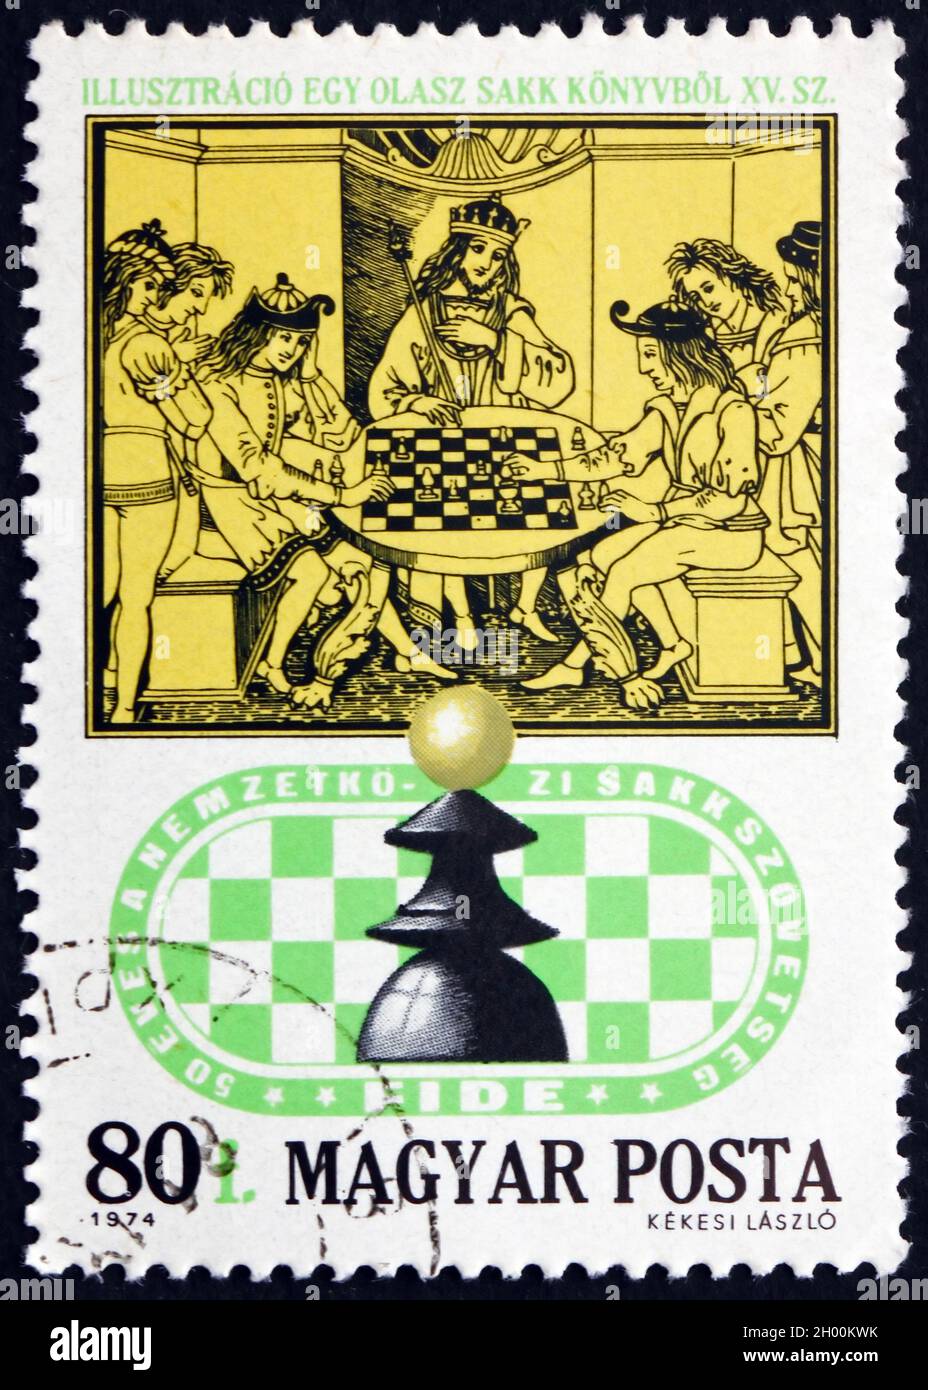 HUNGARY - CIRCA 1974: a stamp printed in Hungary shows Royal Chess Party, 15th Century Italian Chess Book, circa 1974 Stock Photo